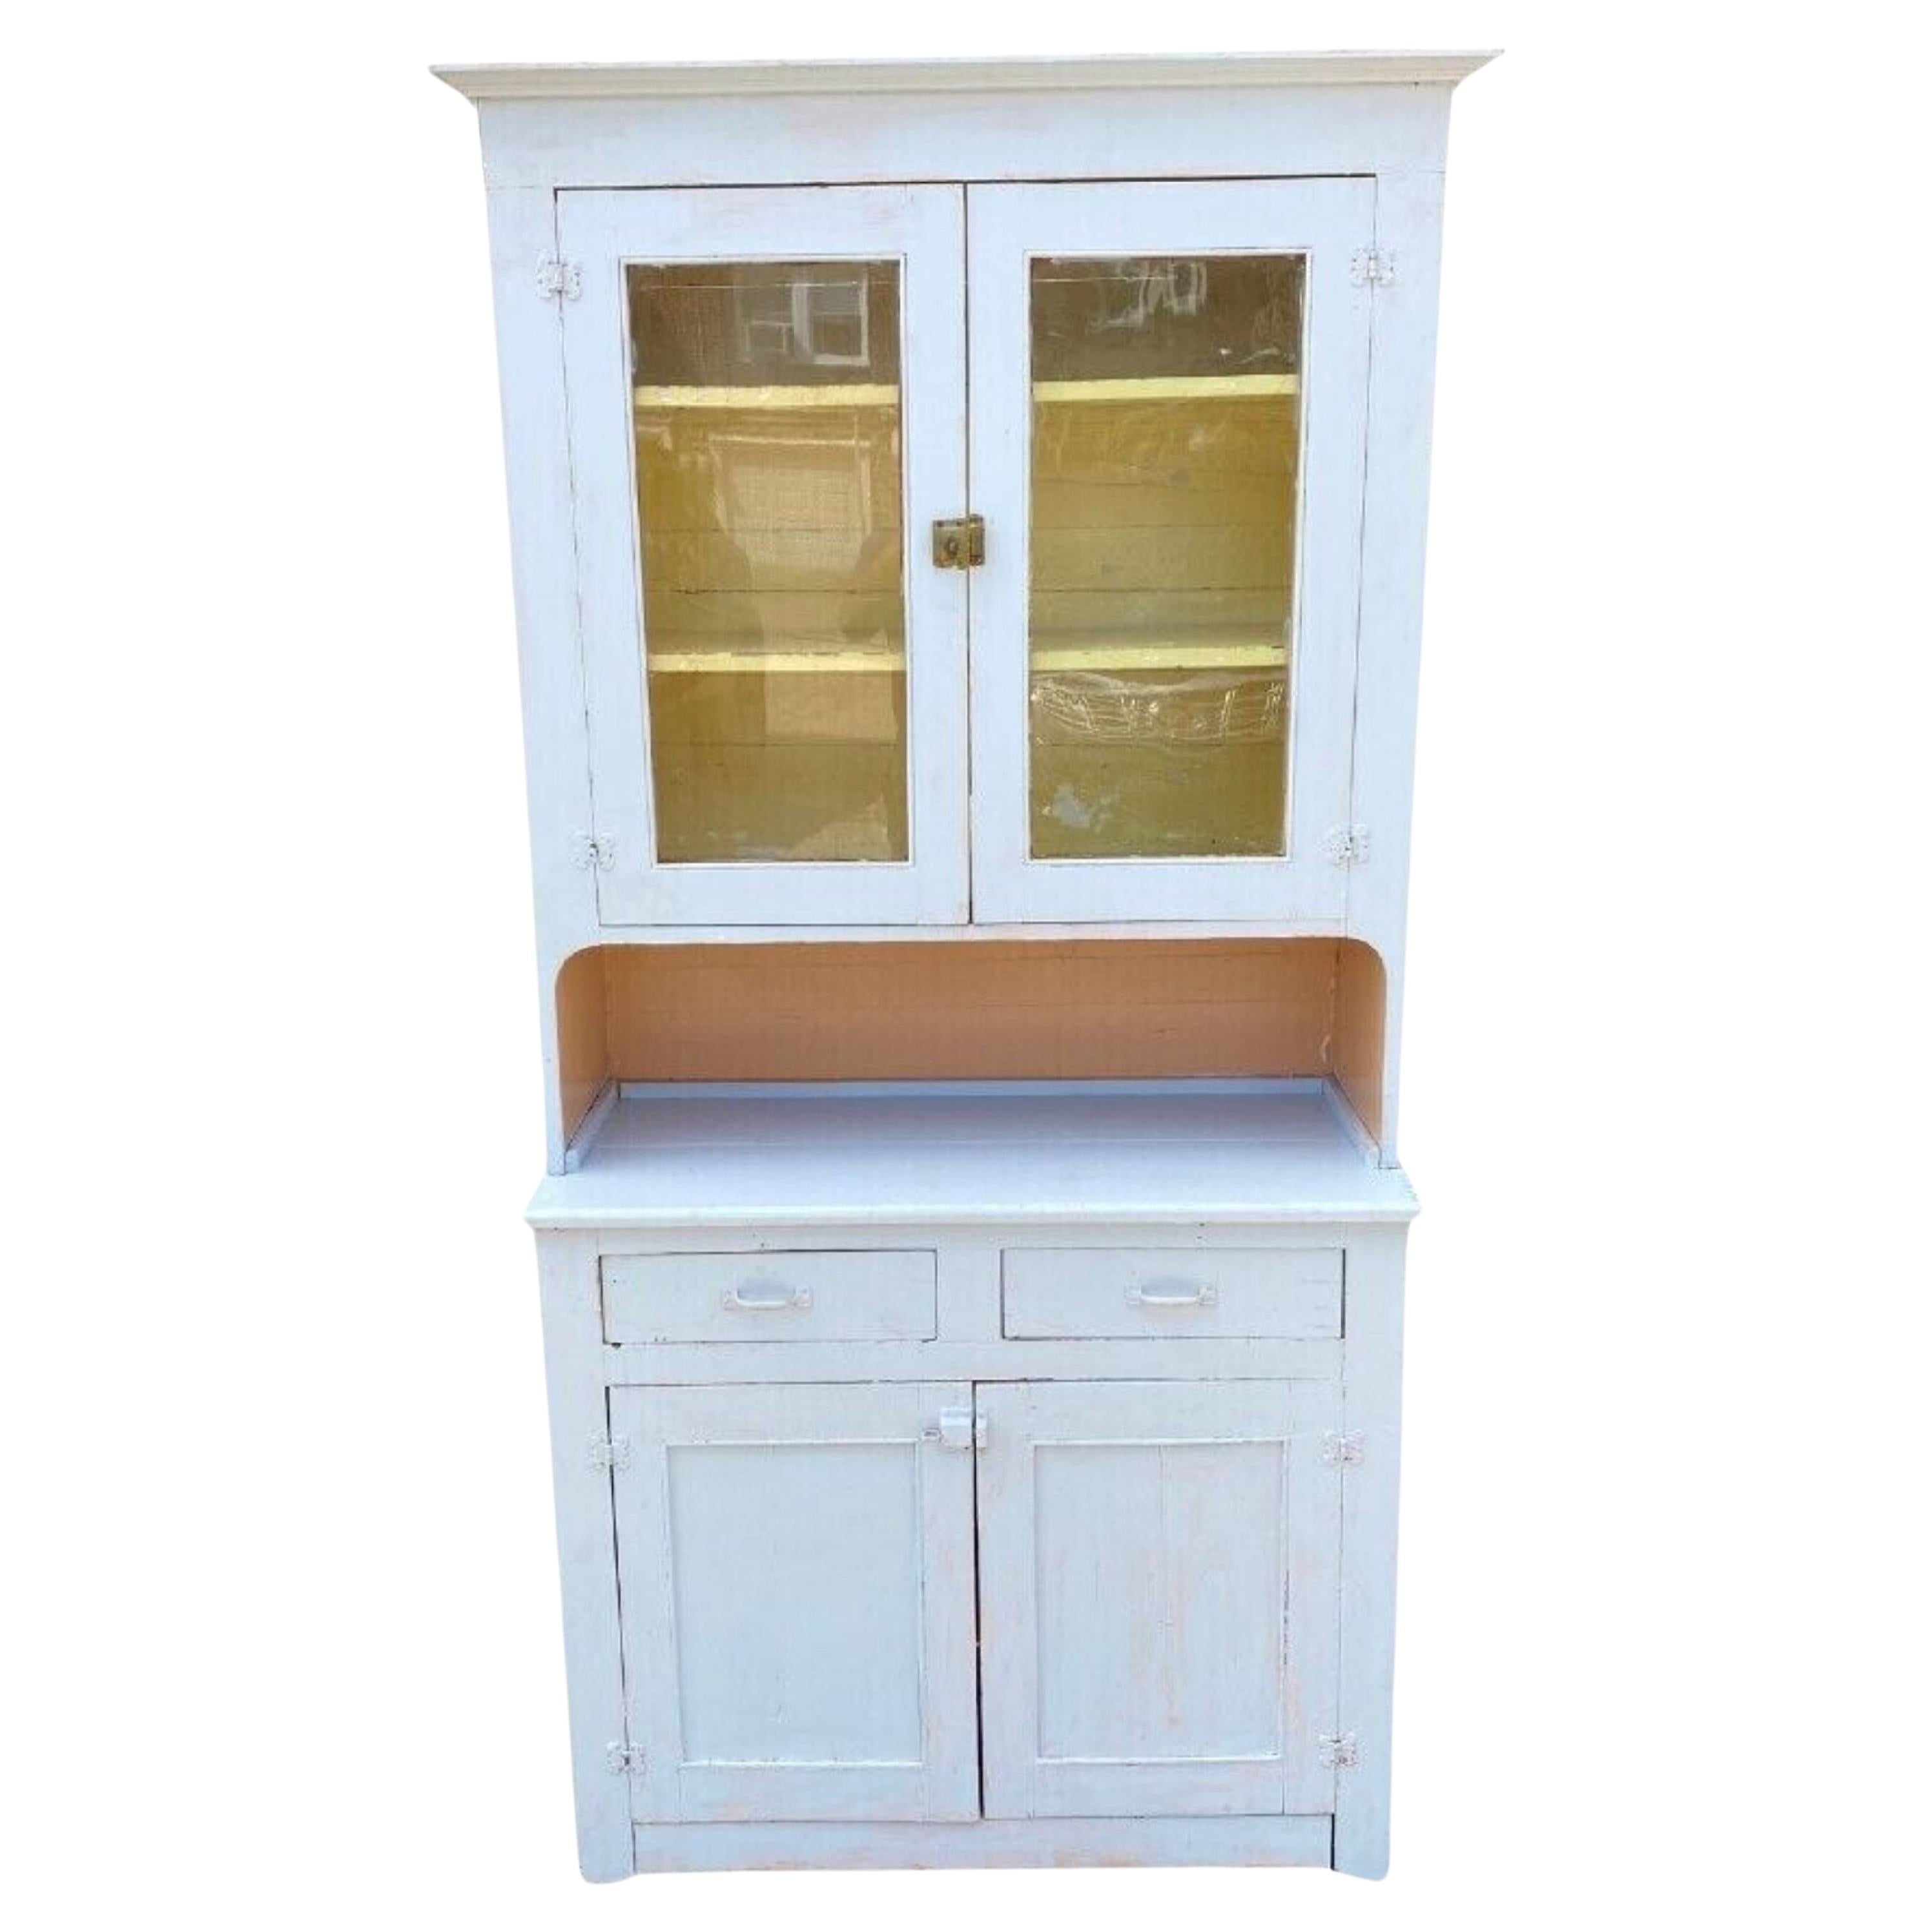 Antique Country Farmhouse White Painted 2 Piece Step Back Hutch Kitchen Cupboard